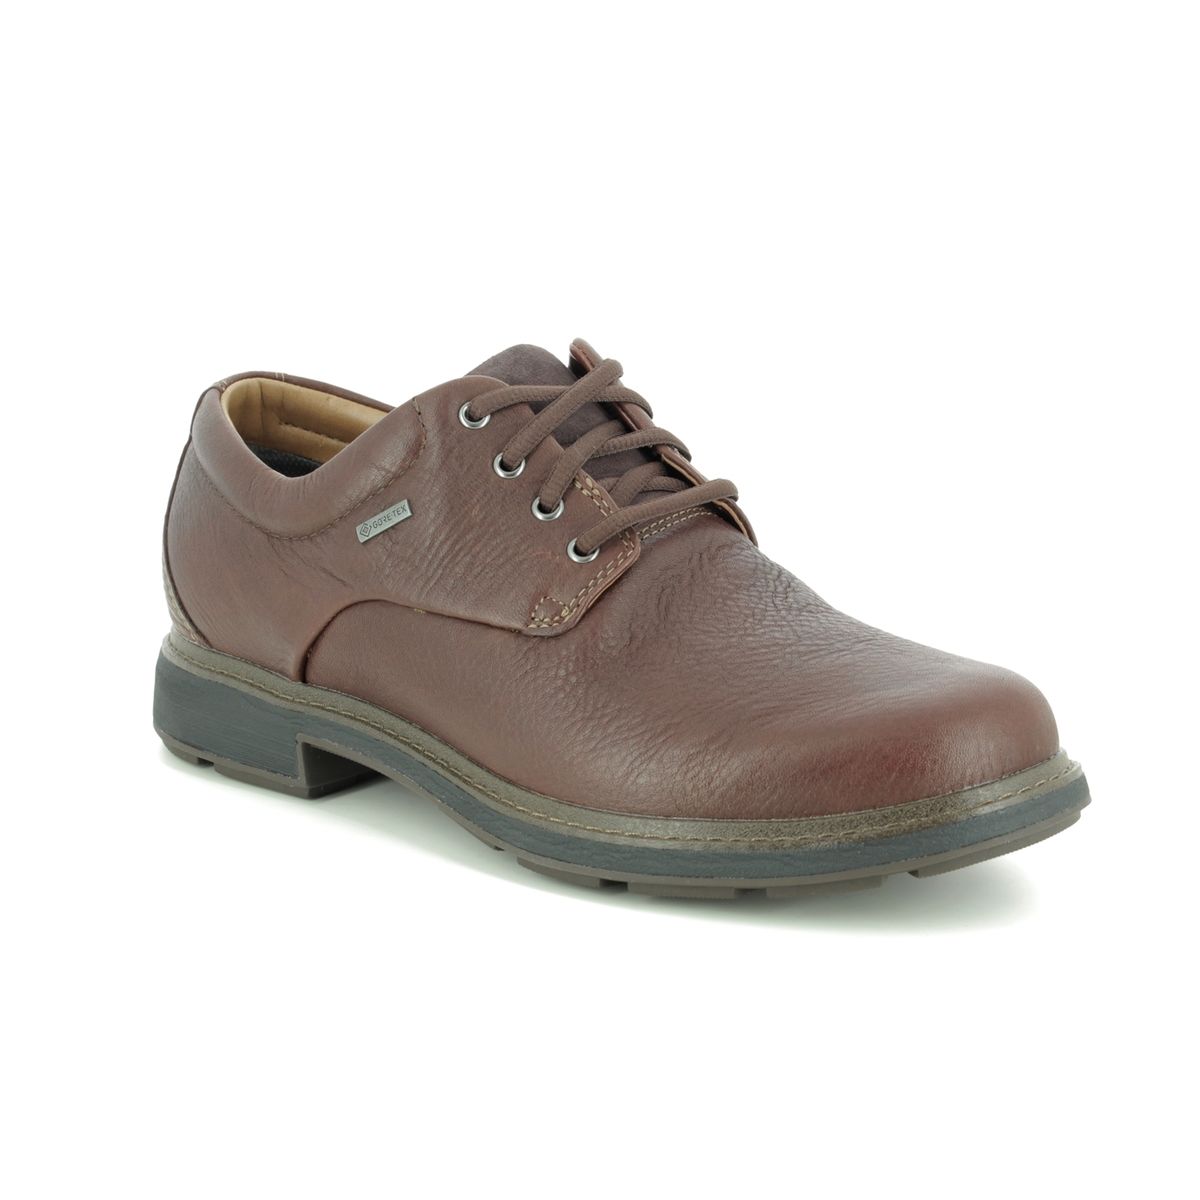 clarks gtx shoes off 73% - online-sms.in